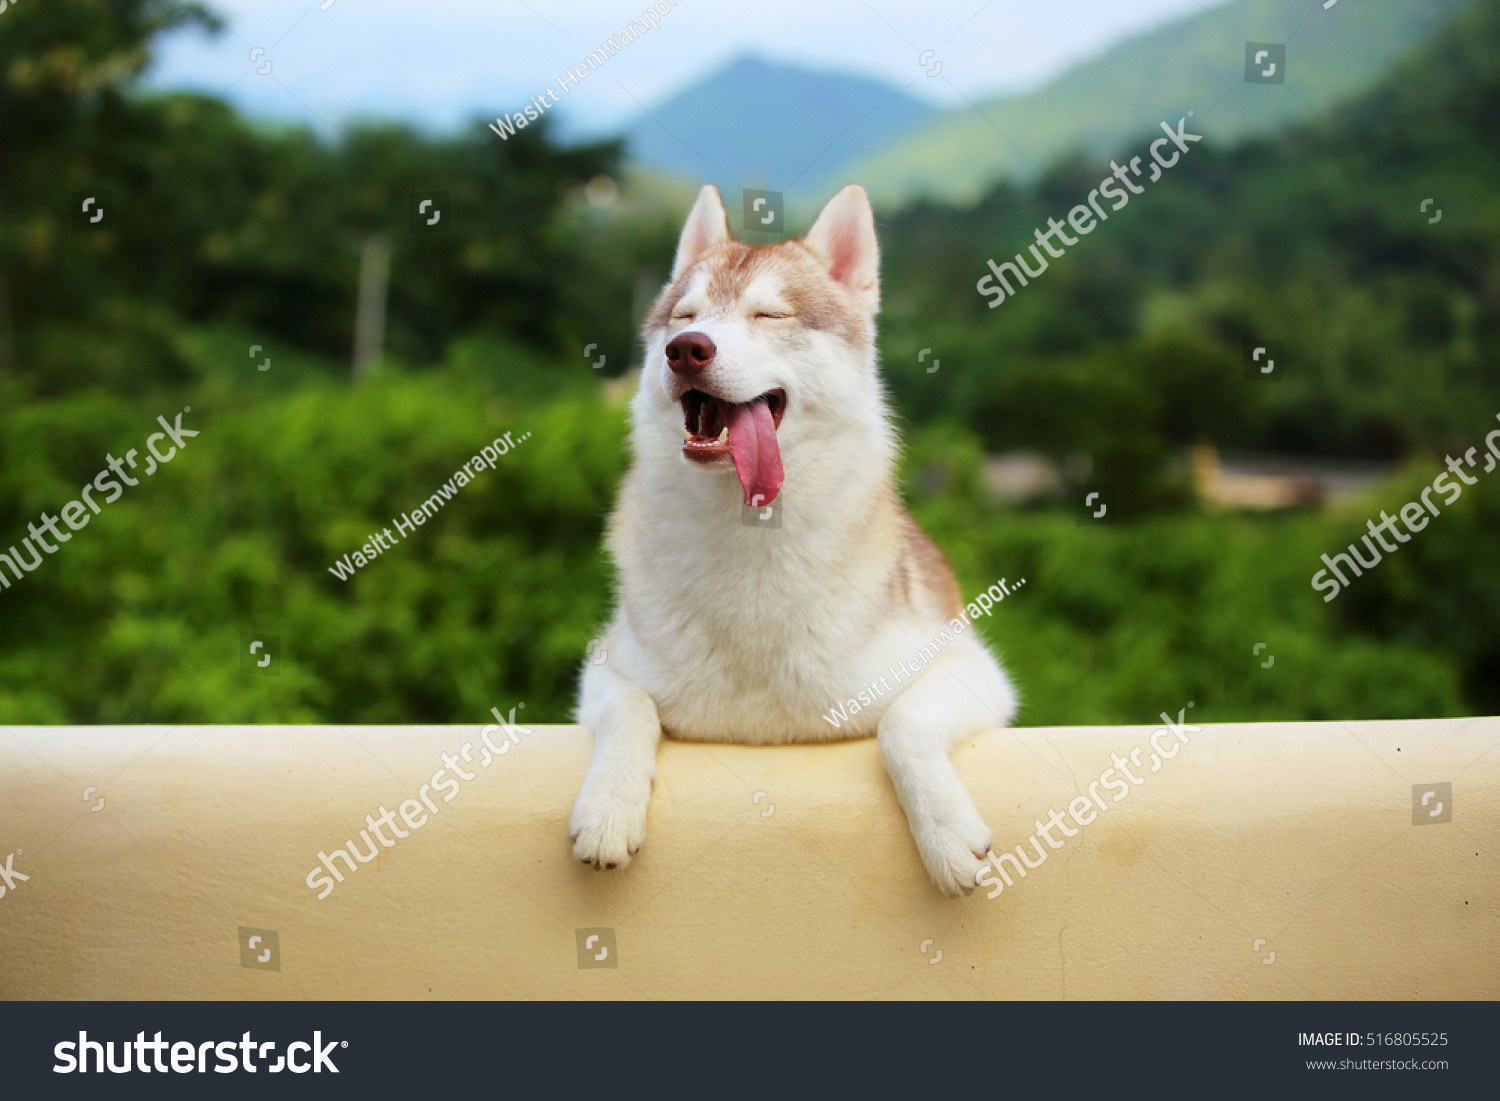 Siberian Husky in grass field with mountain background, happy dog, dog smiling, dog portrait #516805525